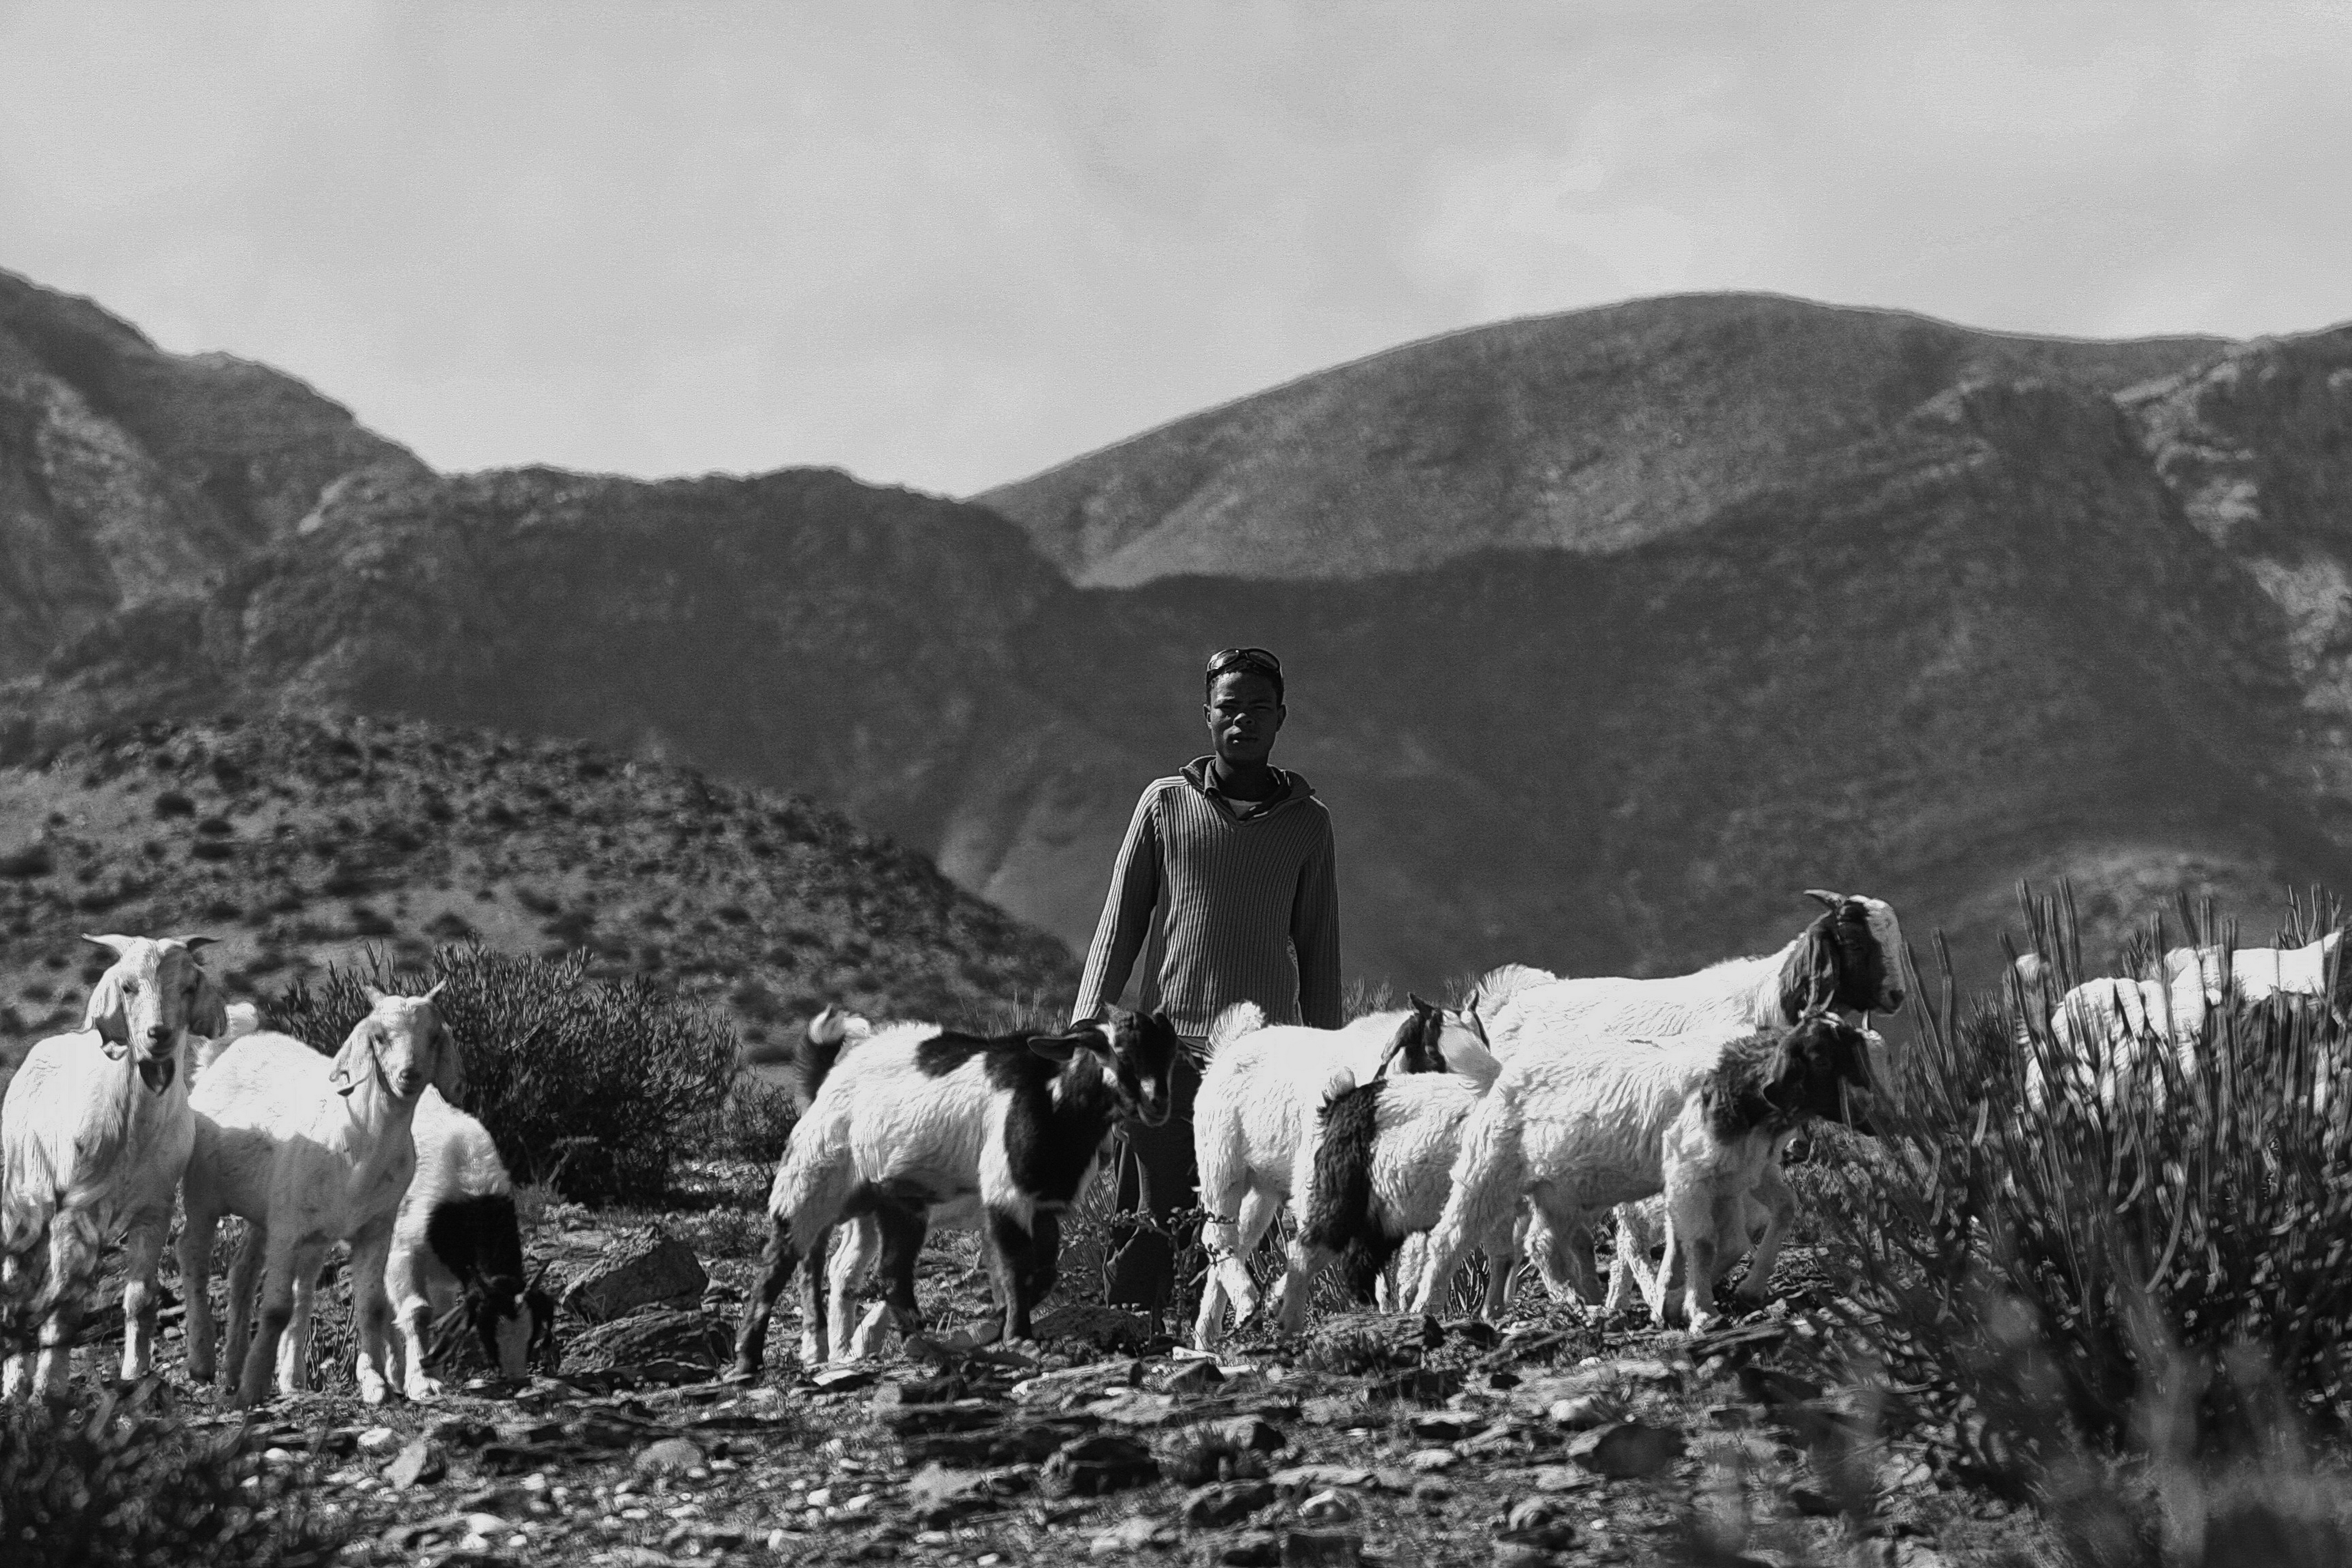 Rodney Joseph – carrying on a 2,000-year-old nomadic pastoral tradition.